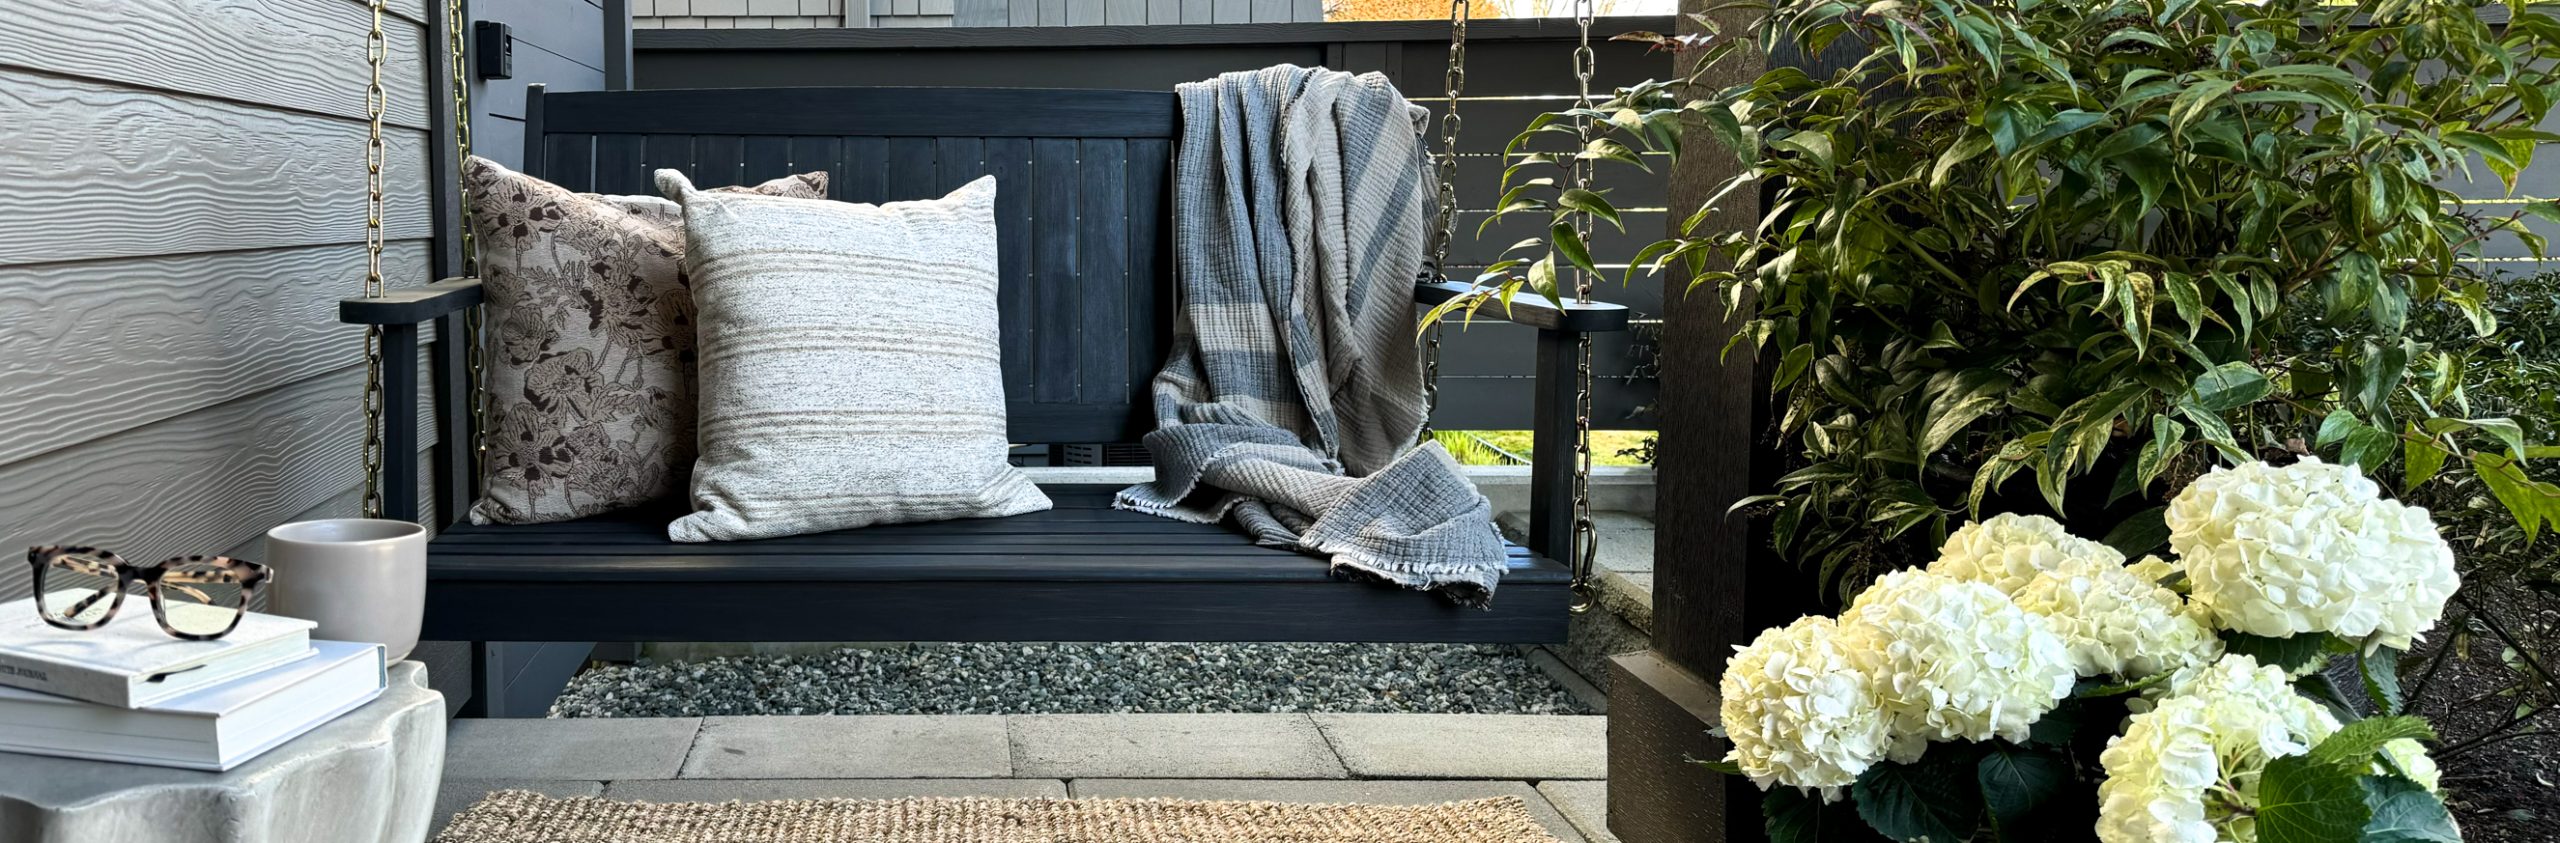 creating the perfect outdoor oasis with products from Wayfair Canada including a porch swing, cozy pillows, blankets, and affordable plant pots.